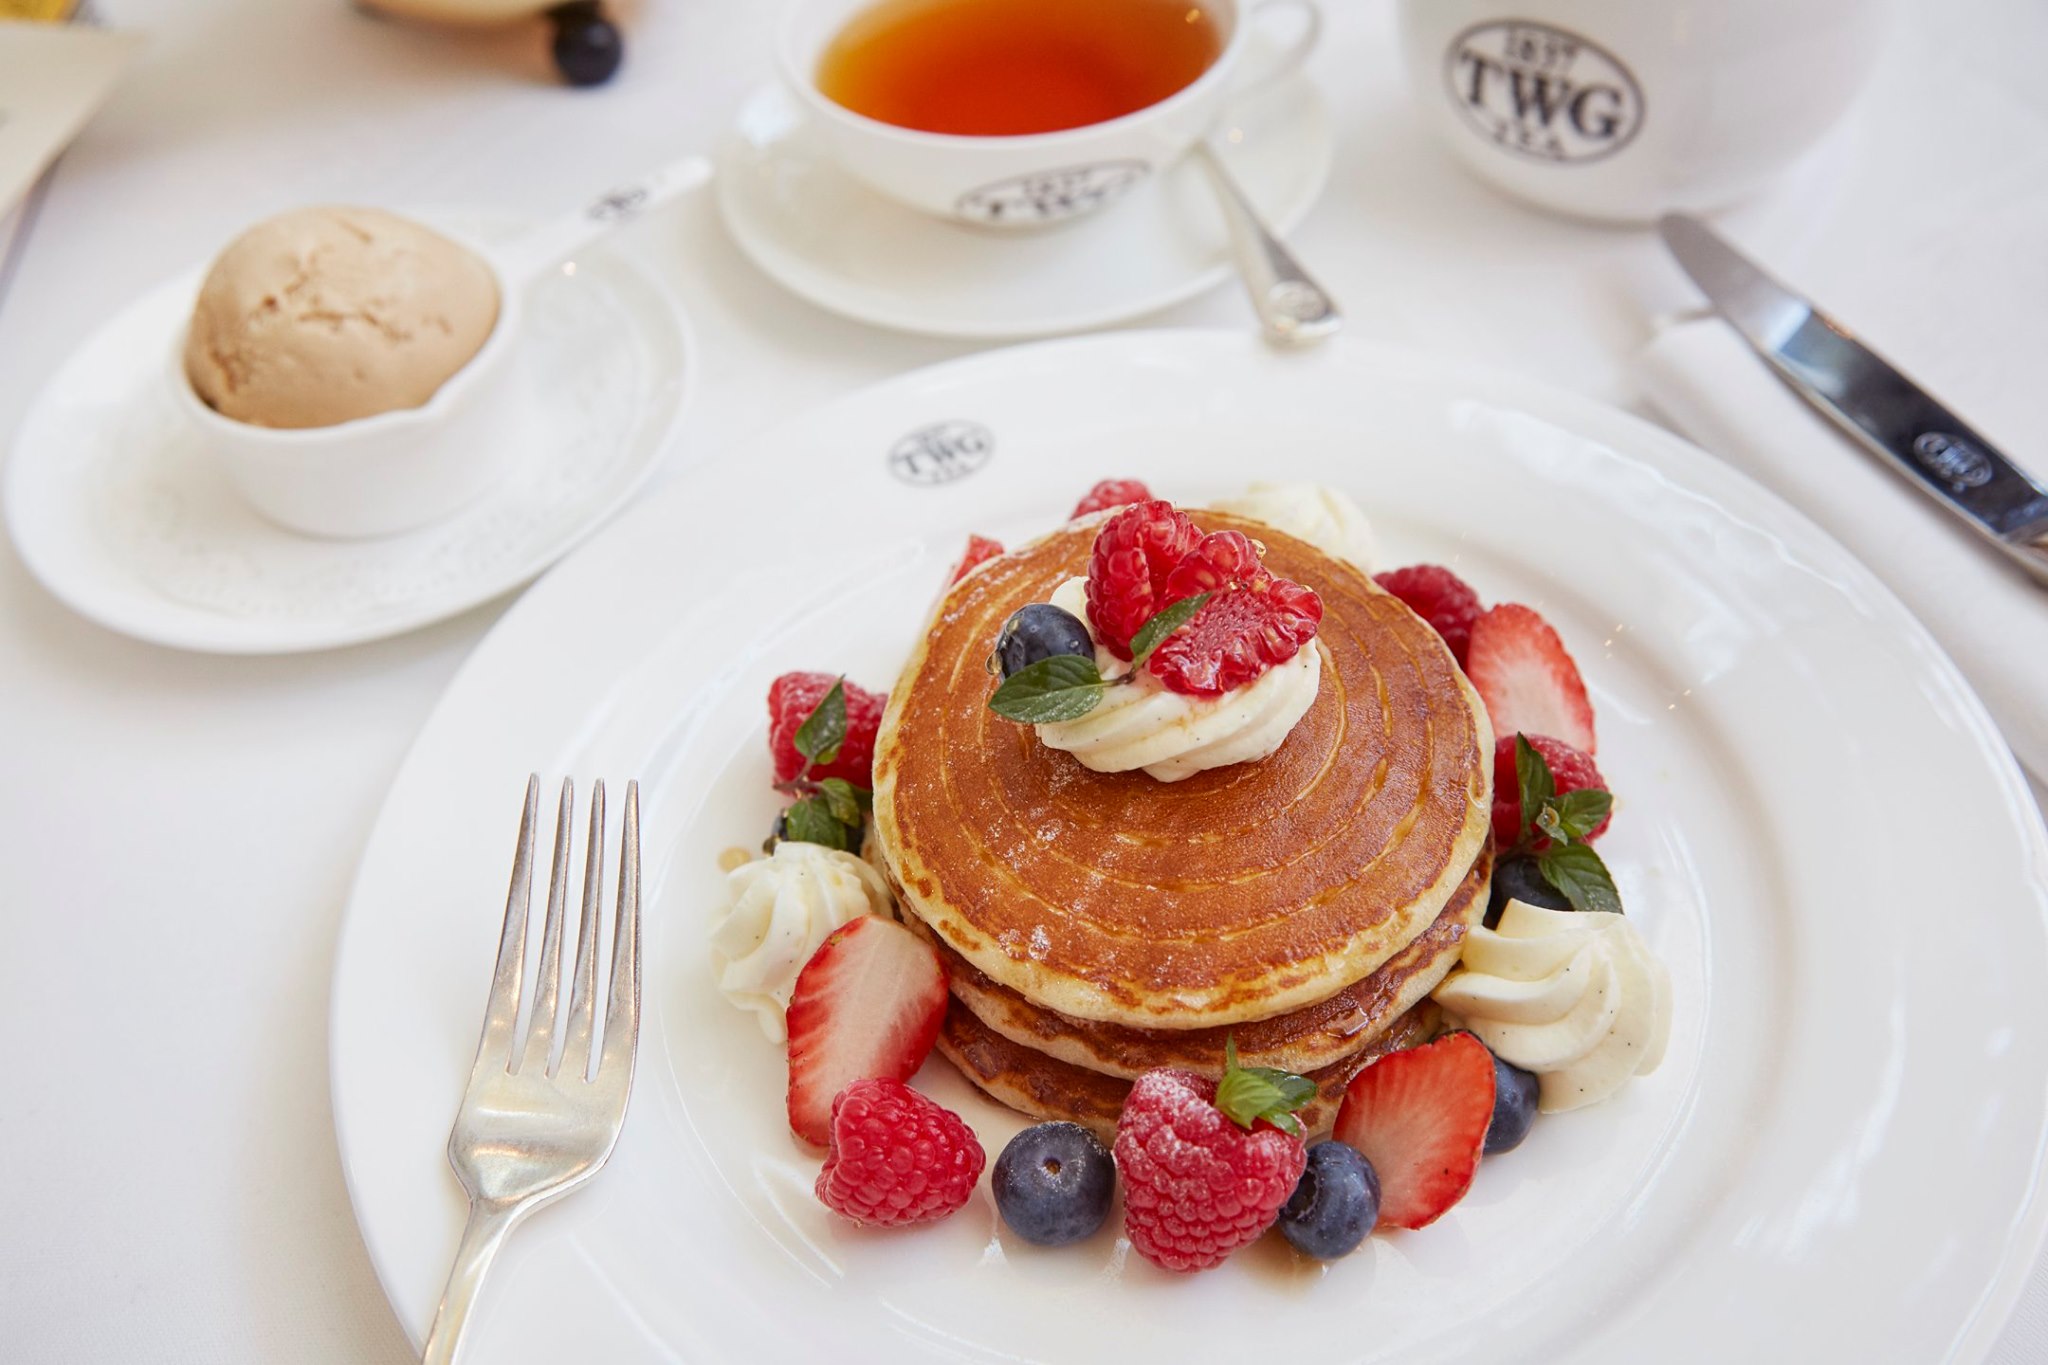 Pancakes accompanied by fresh berries, vanilla Chantilly cream and maple syrup, served with choice of one scoop of Vanilla Bourbon Tea ice cream or 1837 Black Tea sorbet.